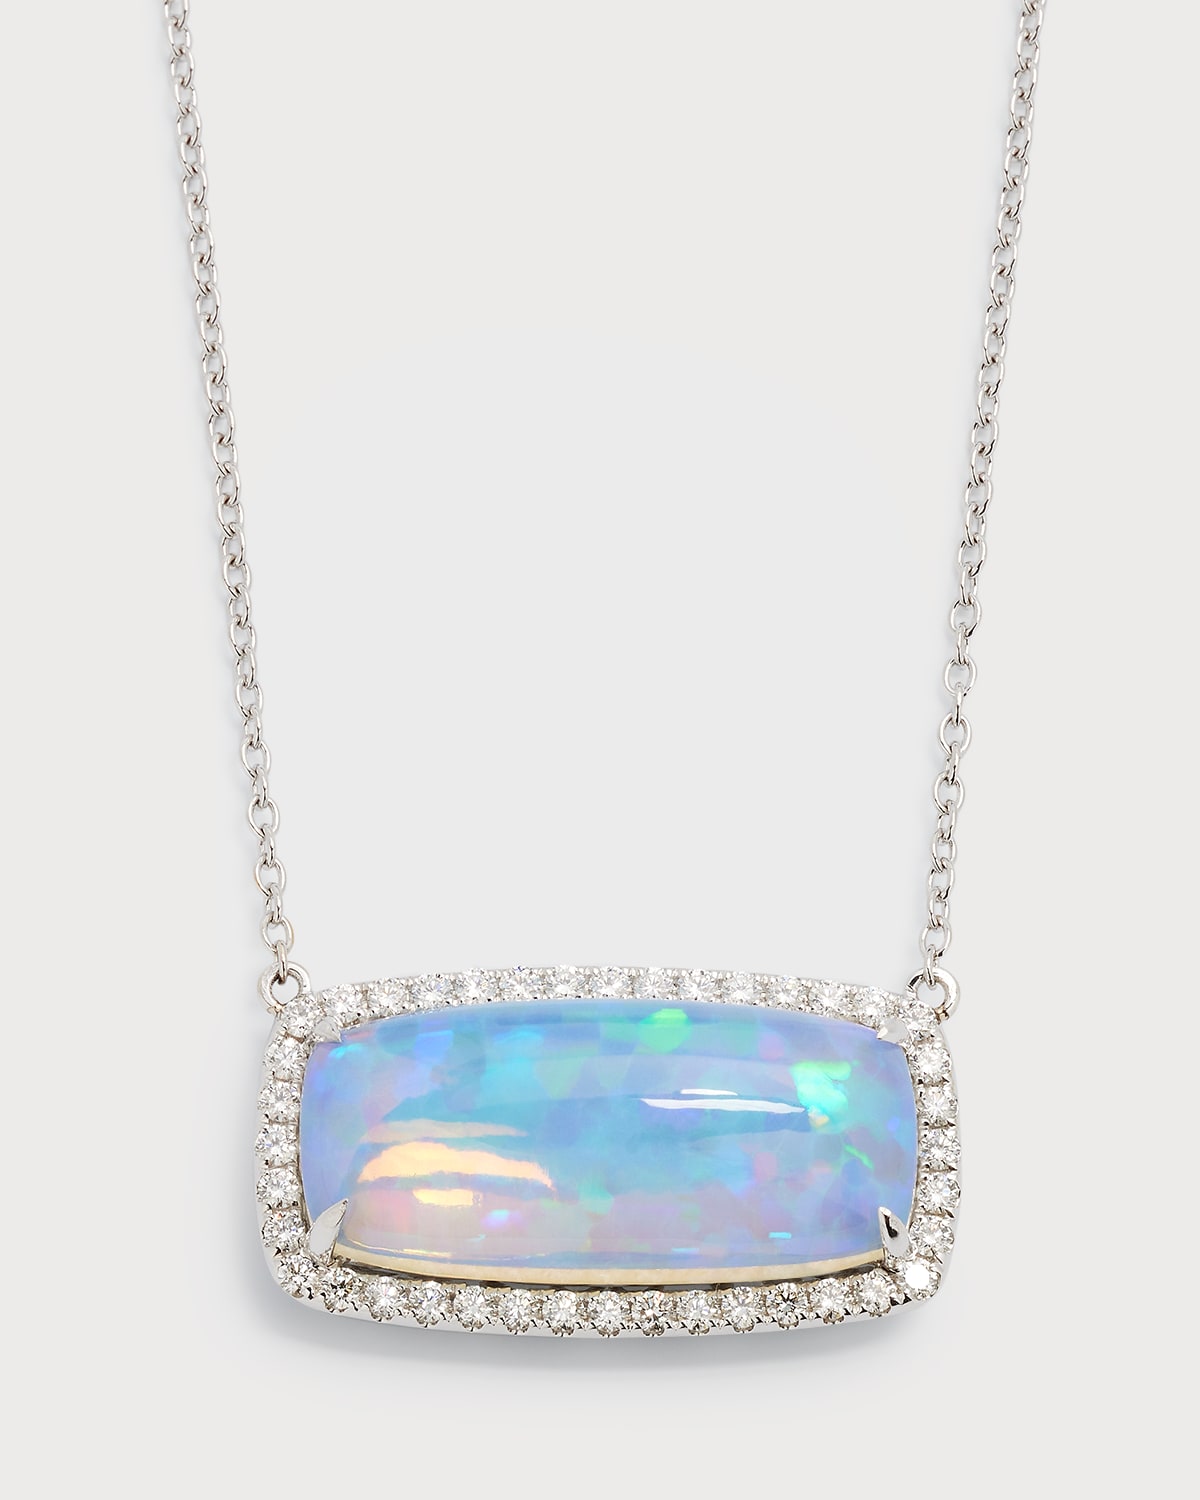 18K White Gold Necklace with Cushion Opal and Diamonds, 11.02tcw